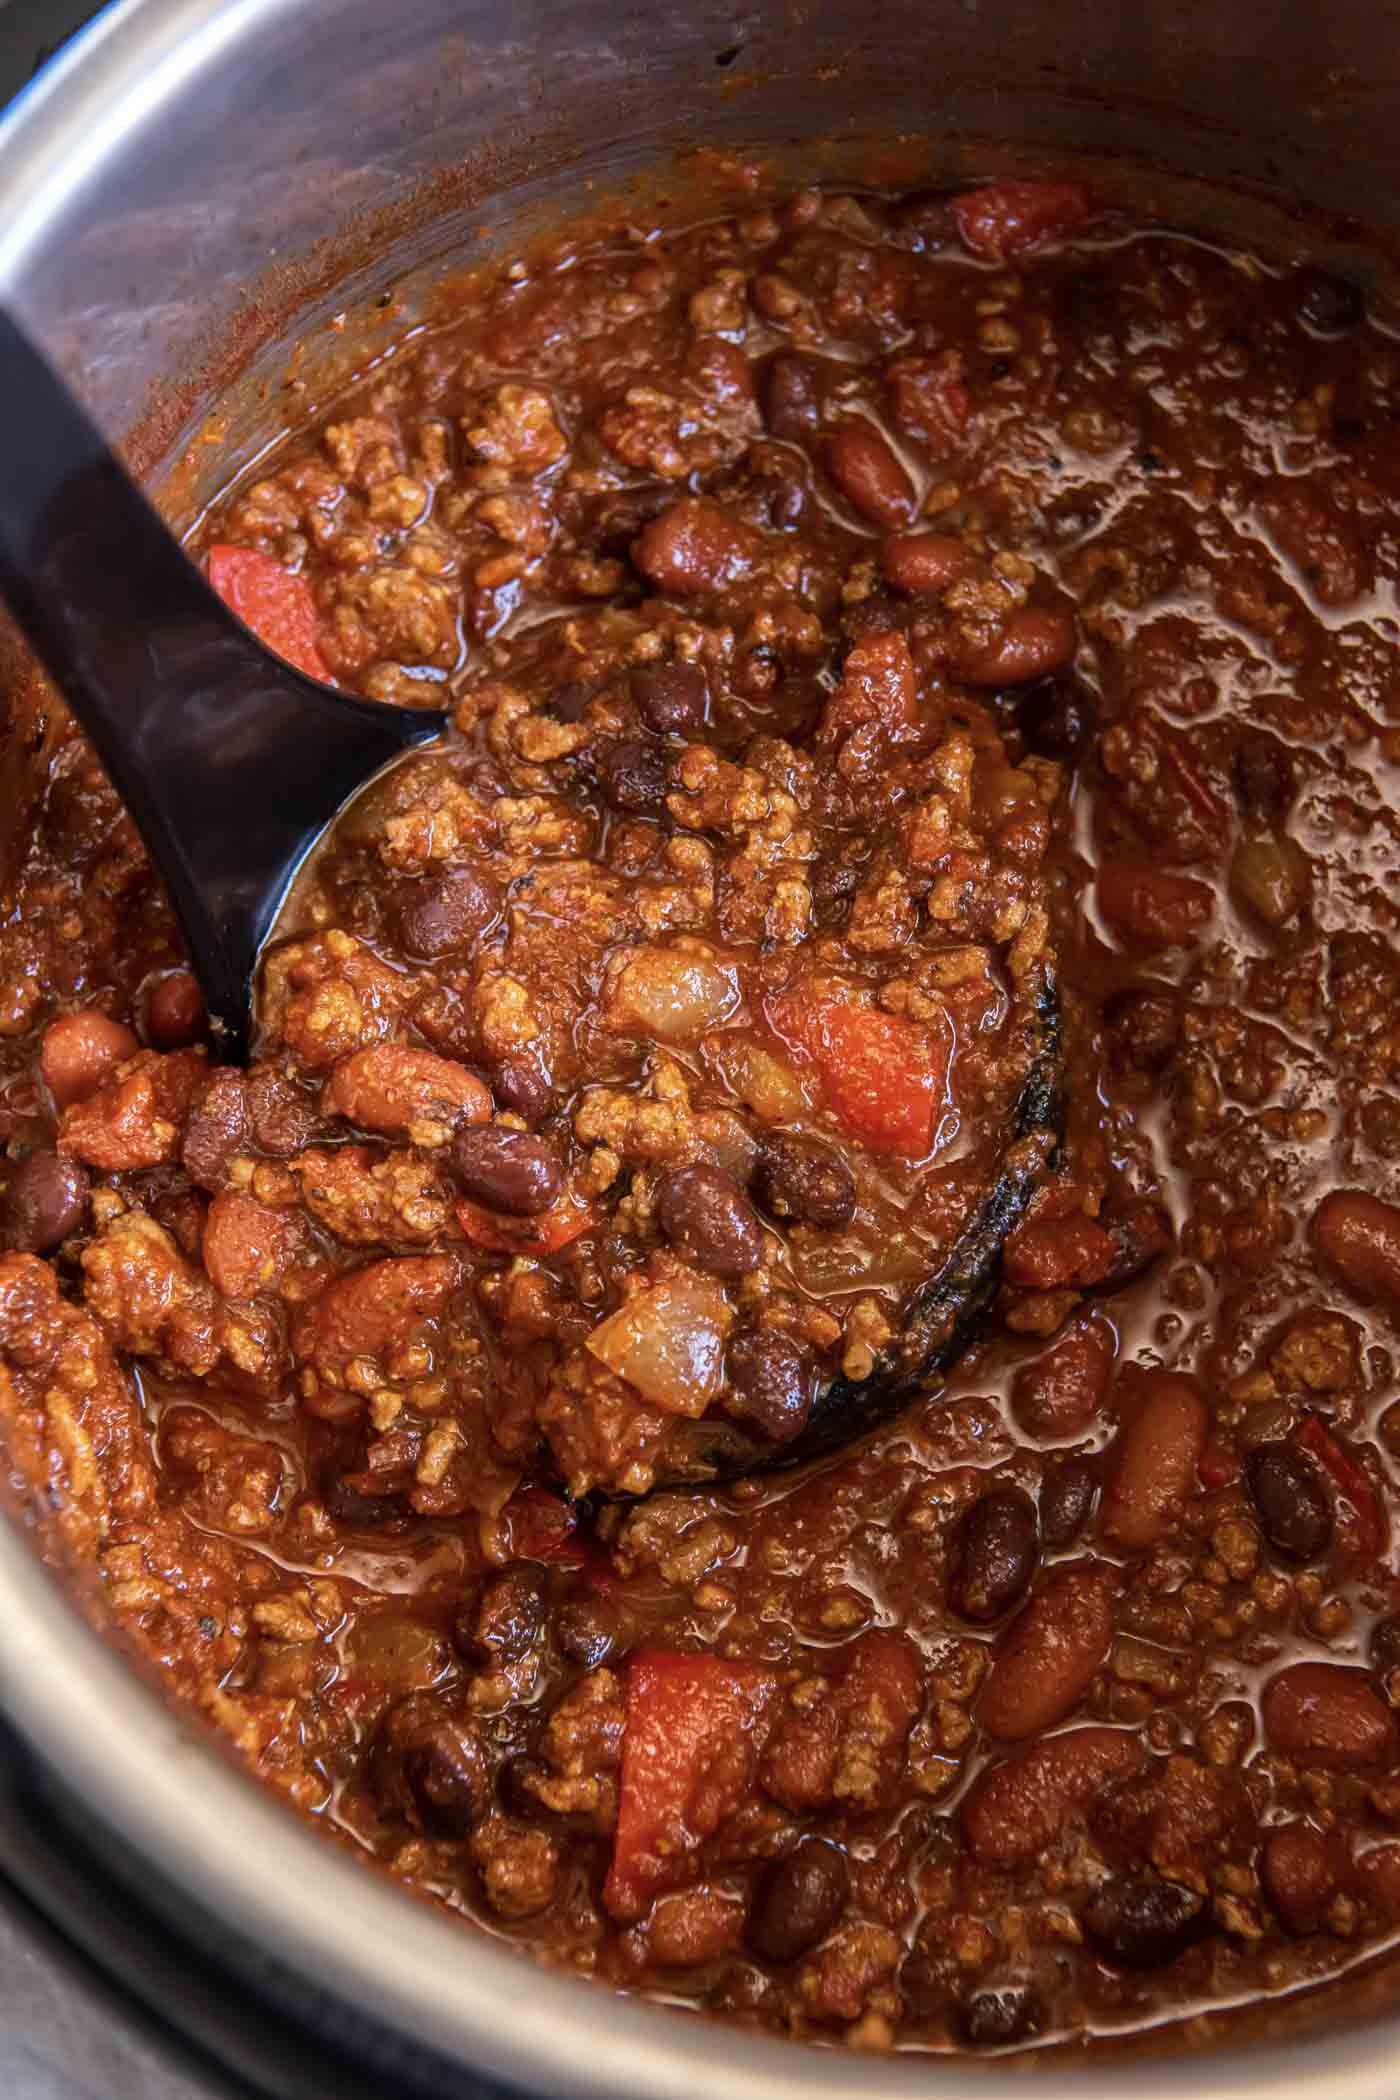 Chili on a ladle set in instant pot.